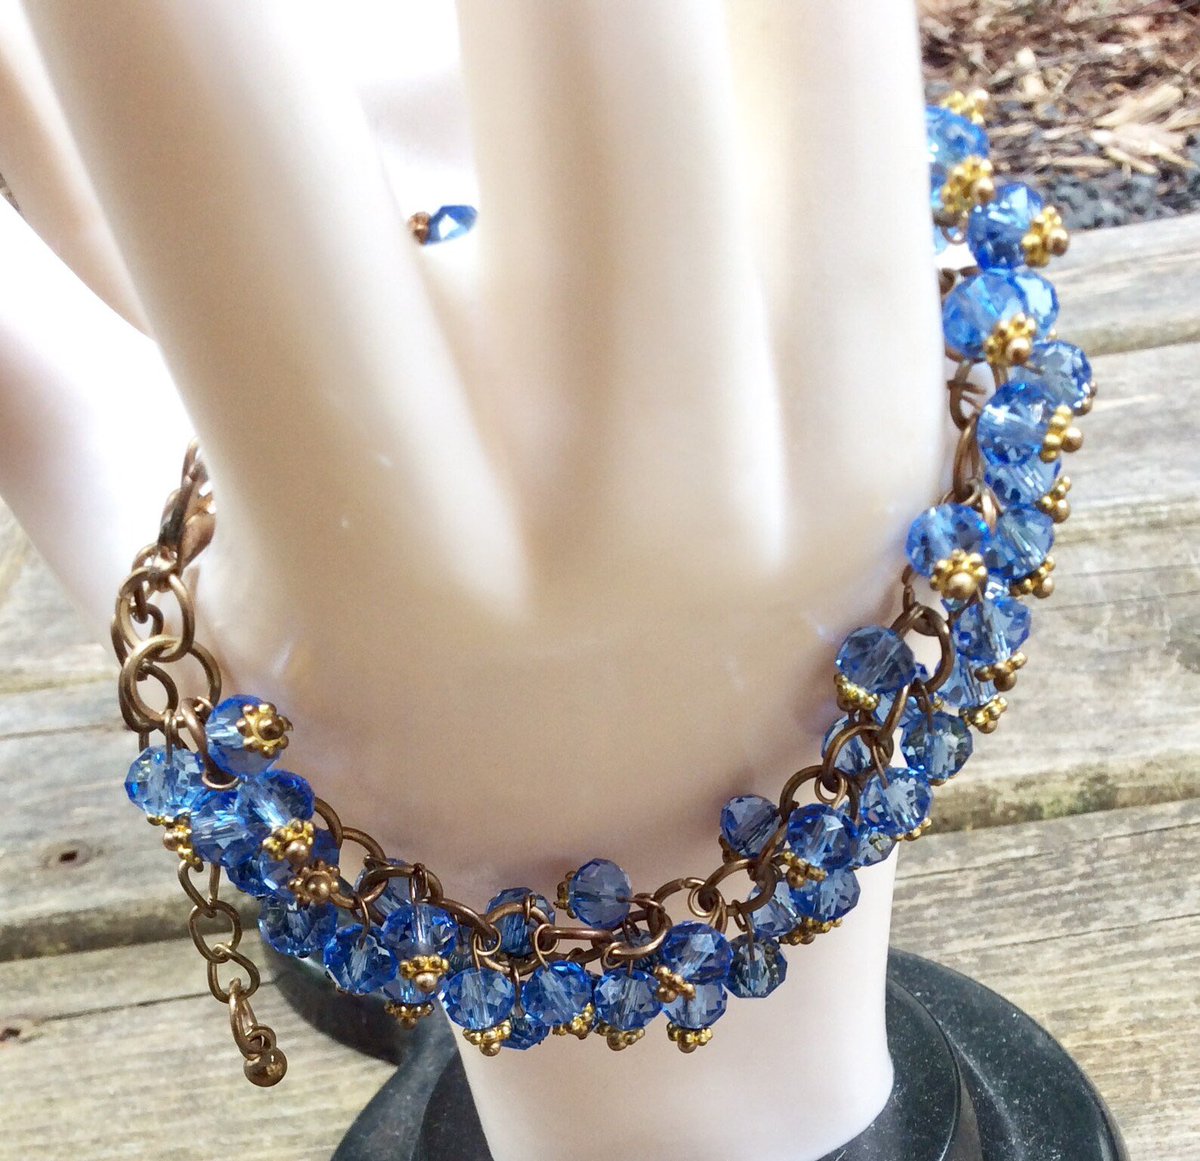 CA$35.00
Vintage transparent faceted blue beaded Bracelet, #vintageweddingfashions #80sJewelry available from crow vanity jewelry on Etsy #etsyjewellery #etsyvintage #etsyvintagejewelry #vintagebracelets #braceletoftheday